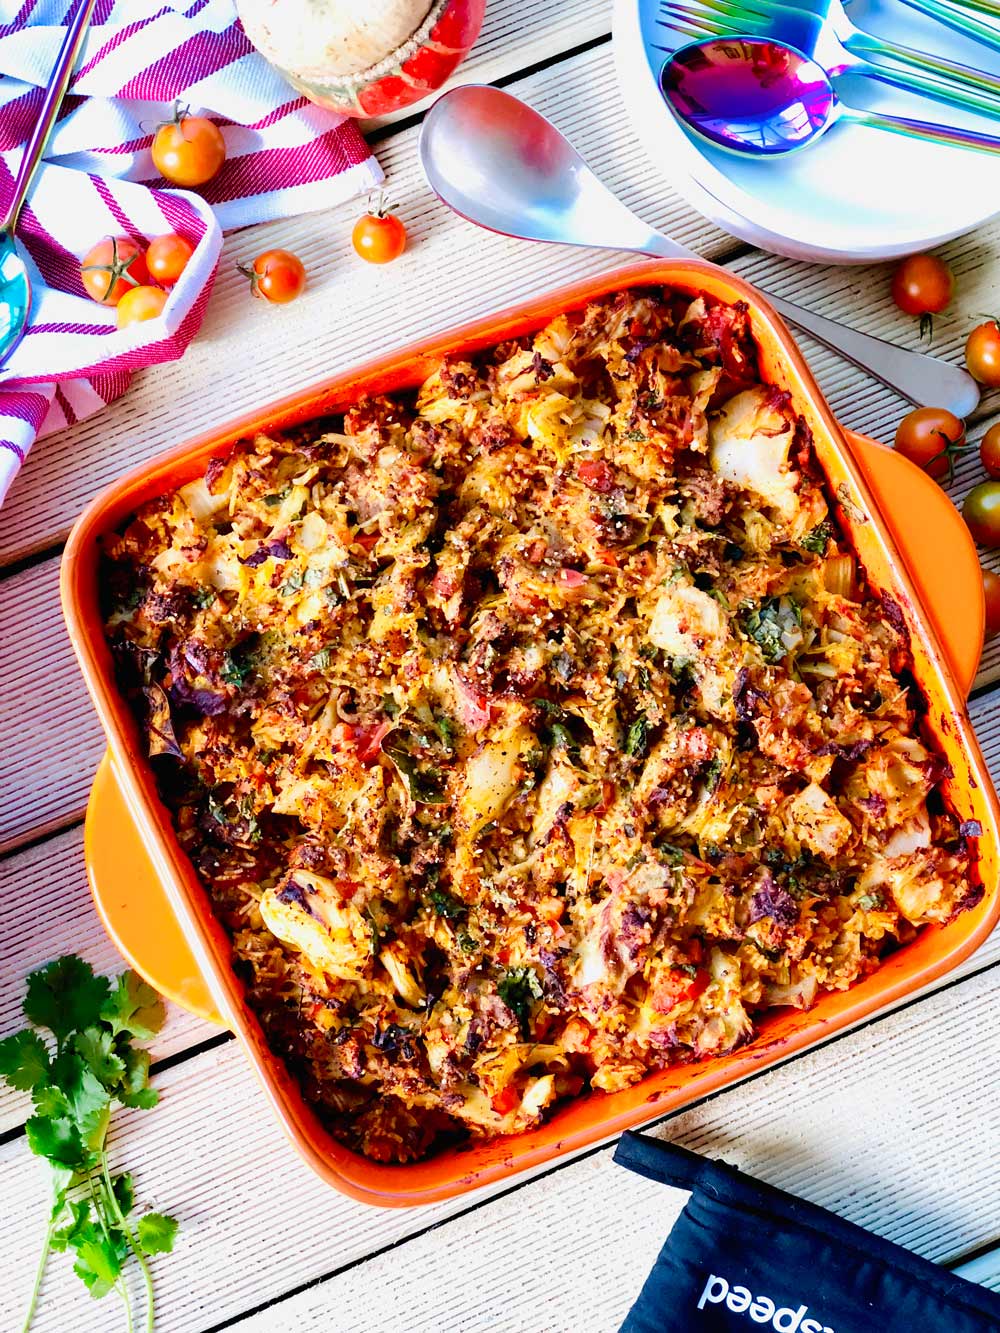 Cabbage Casserole With Mince Beef And Fresh Herbs